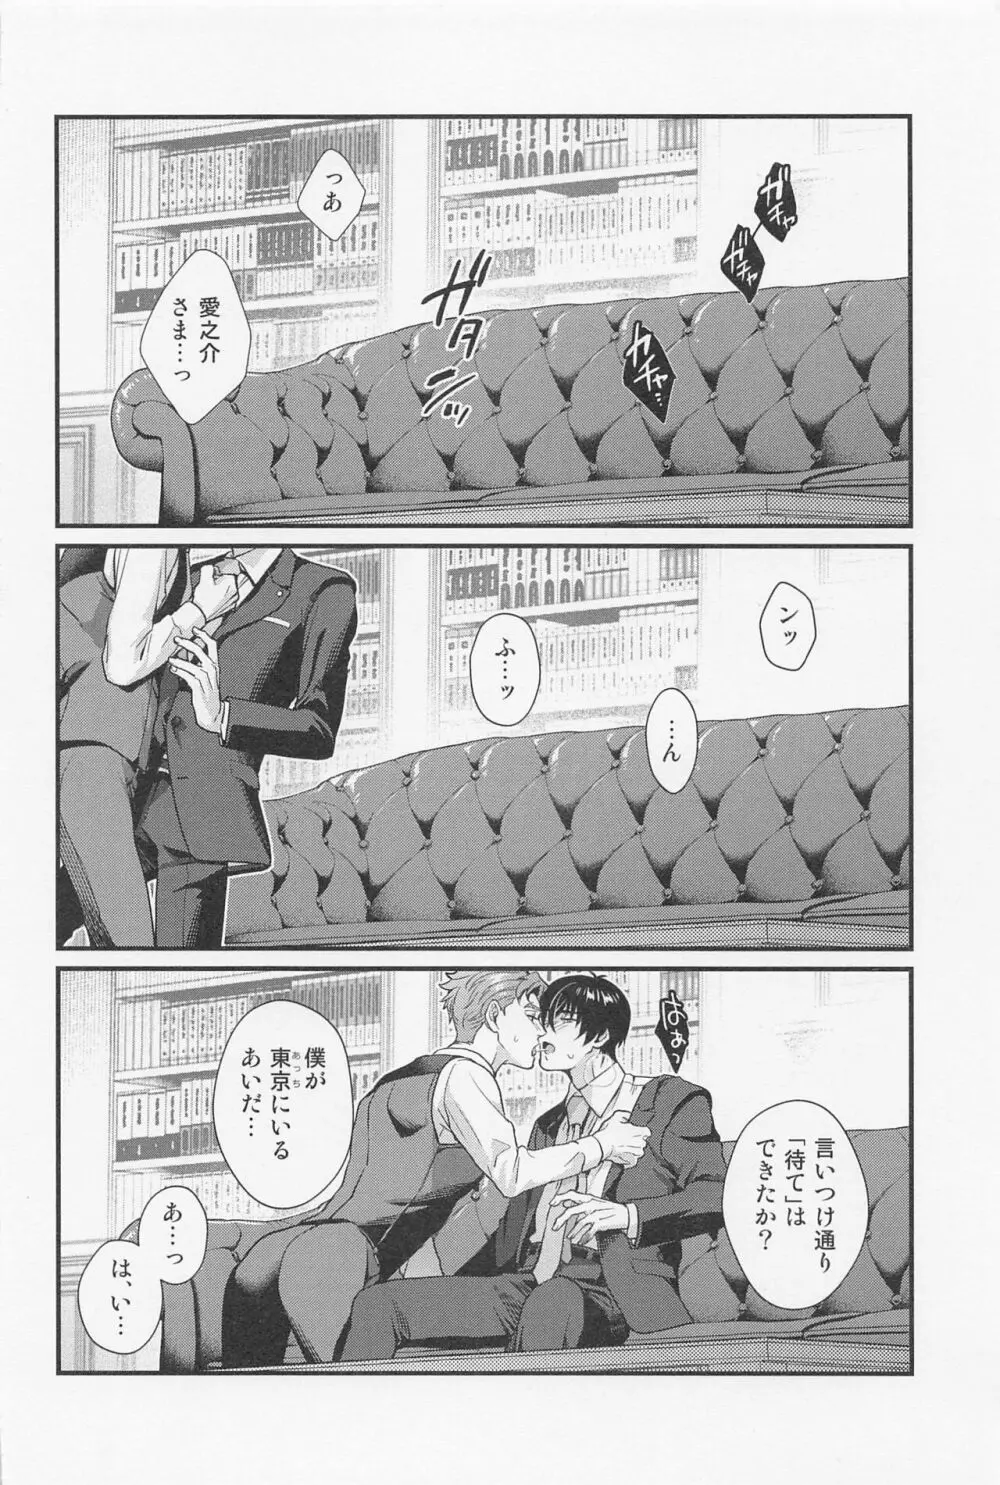 LOVE FIXED POINT - 愛の定点観測 Page.5